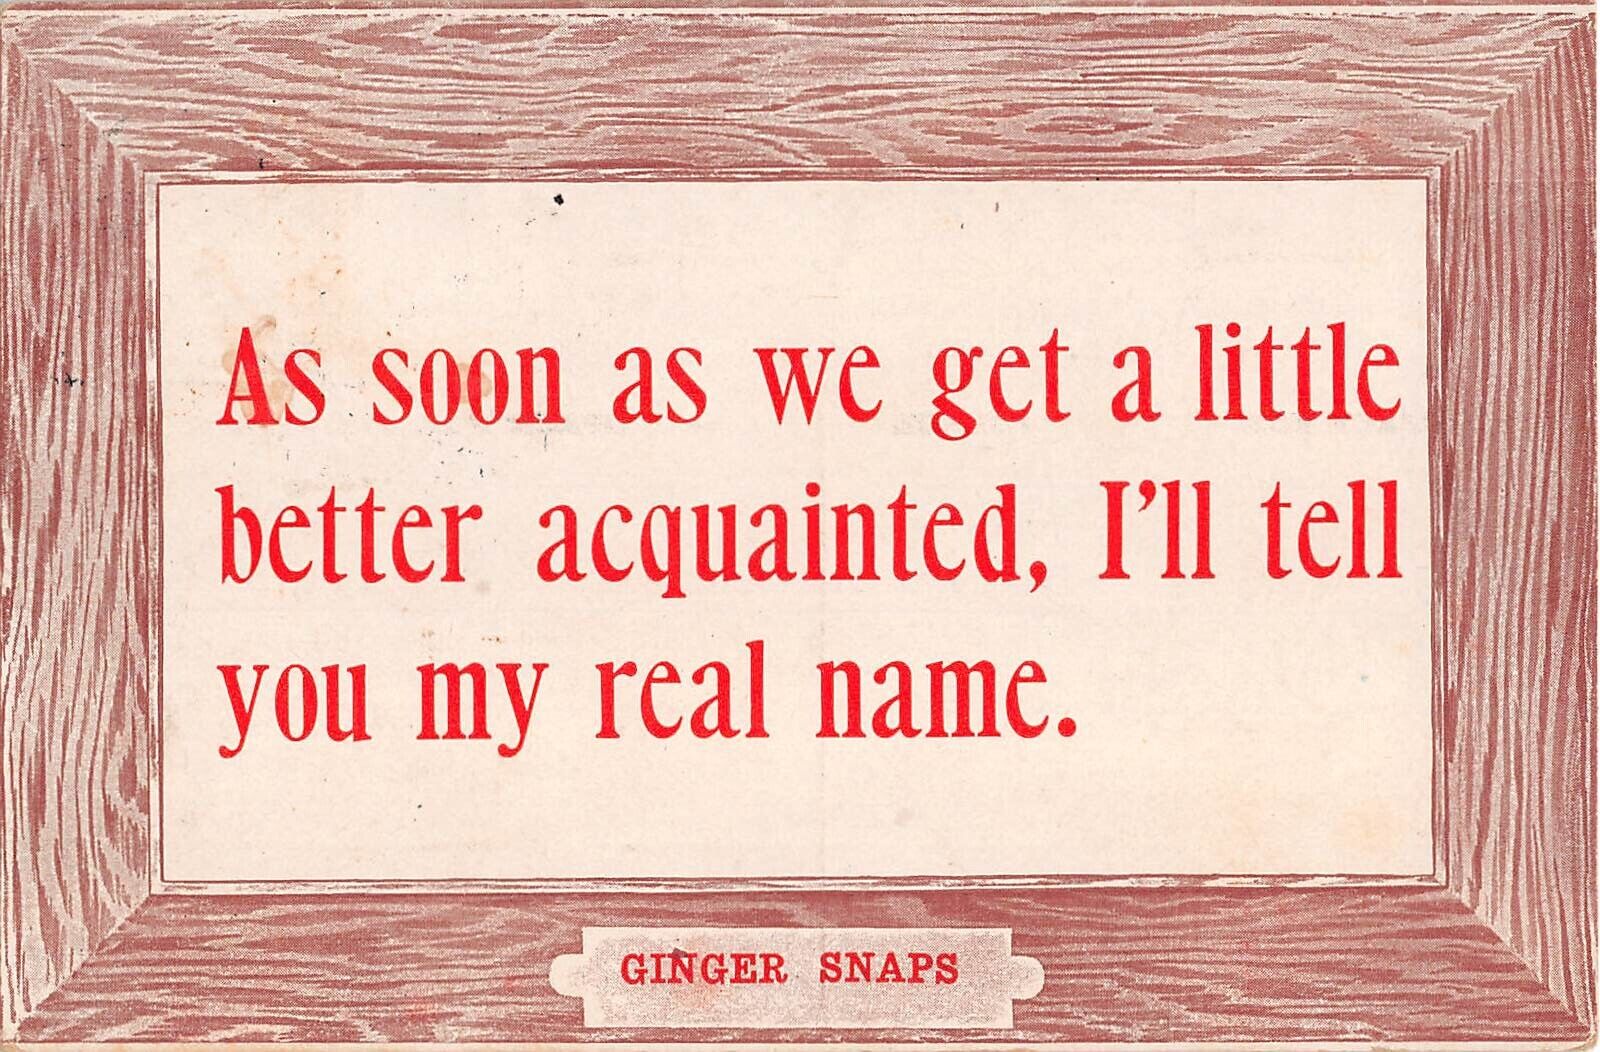 1910 Comic Ginger Snaps Motto PC-As Soon As We Get A Little Better Acquainted, I